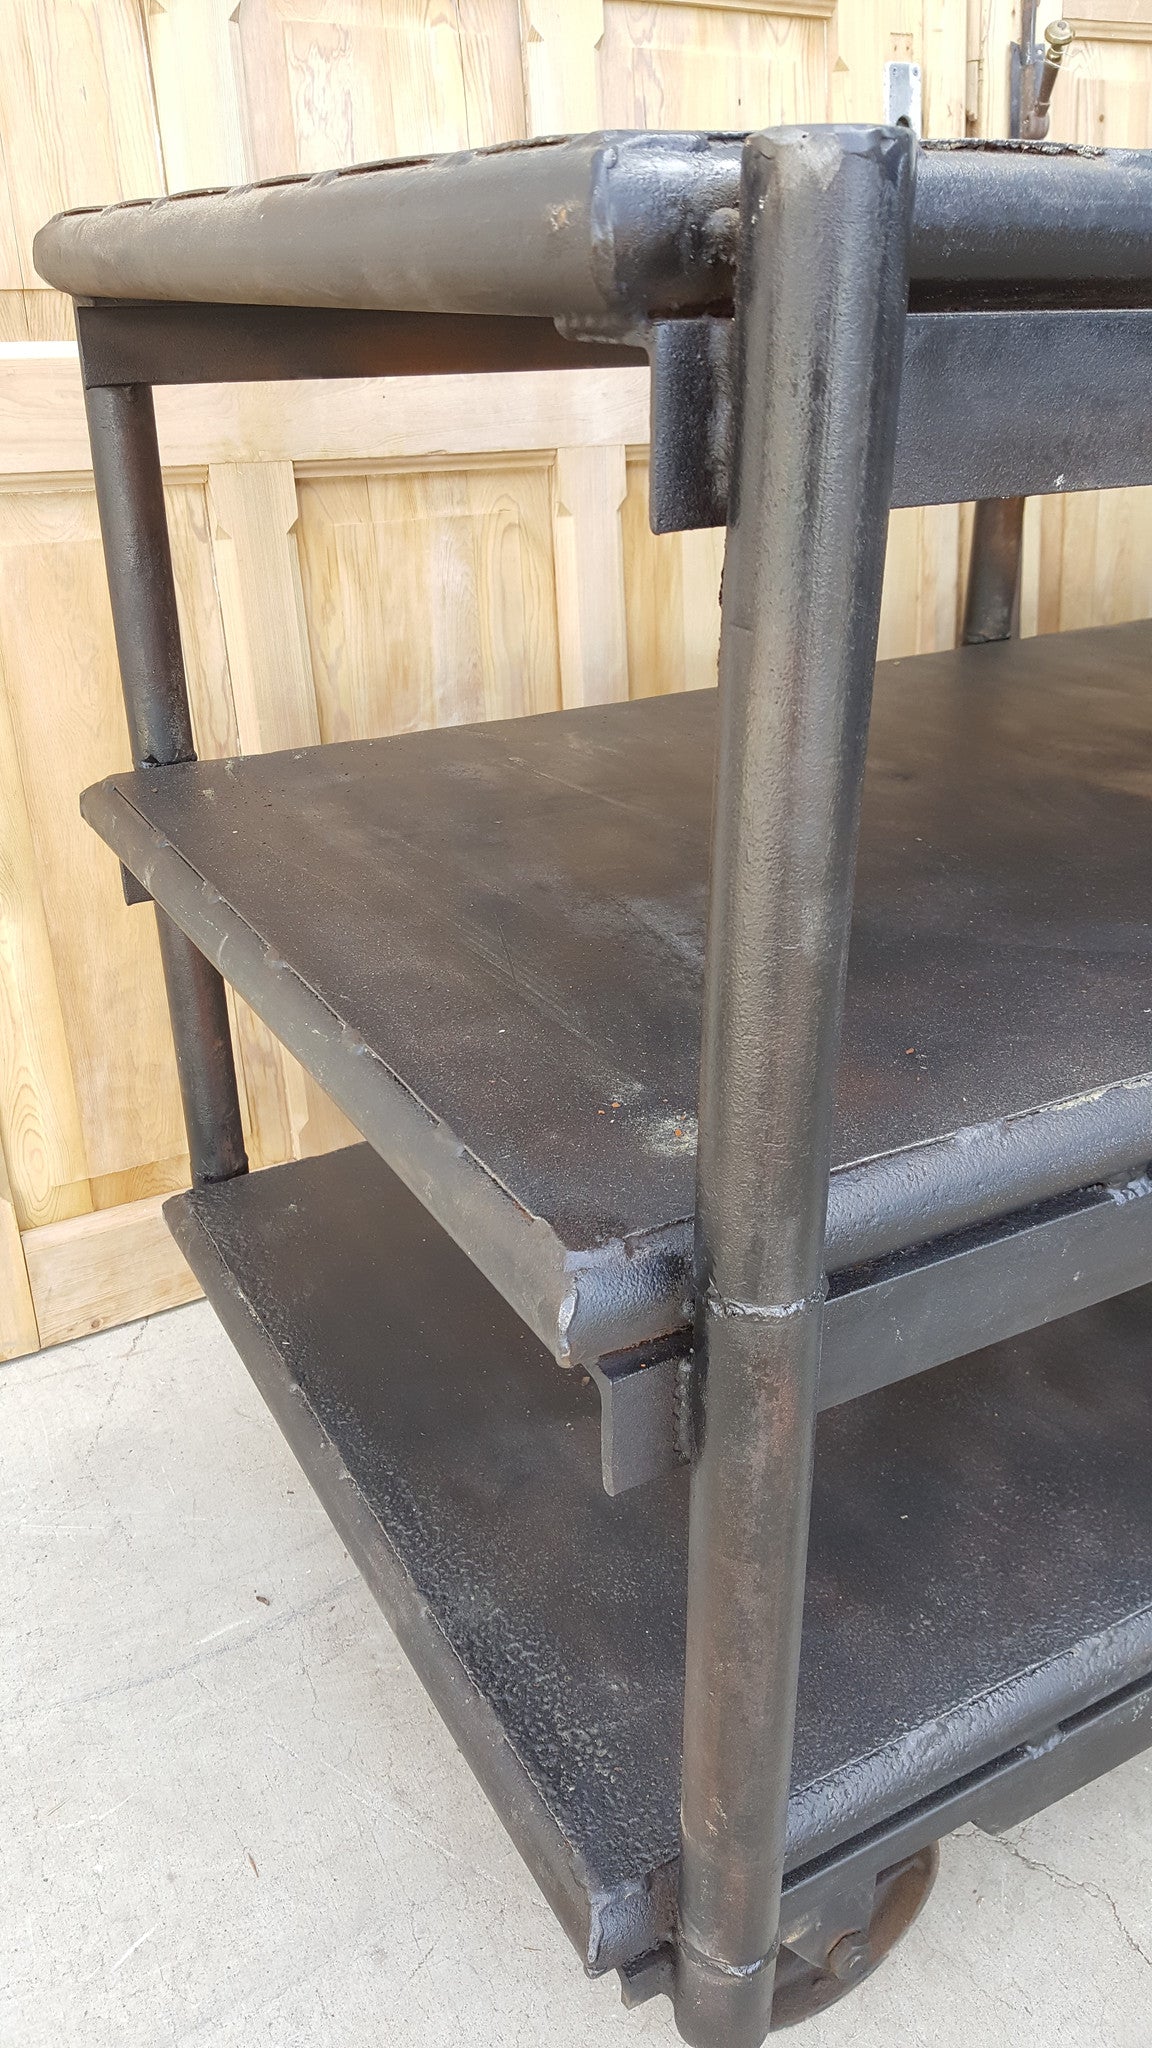 Industrial 3 Tier Rolling Iron Island Work Table